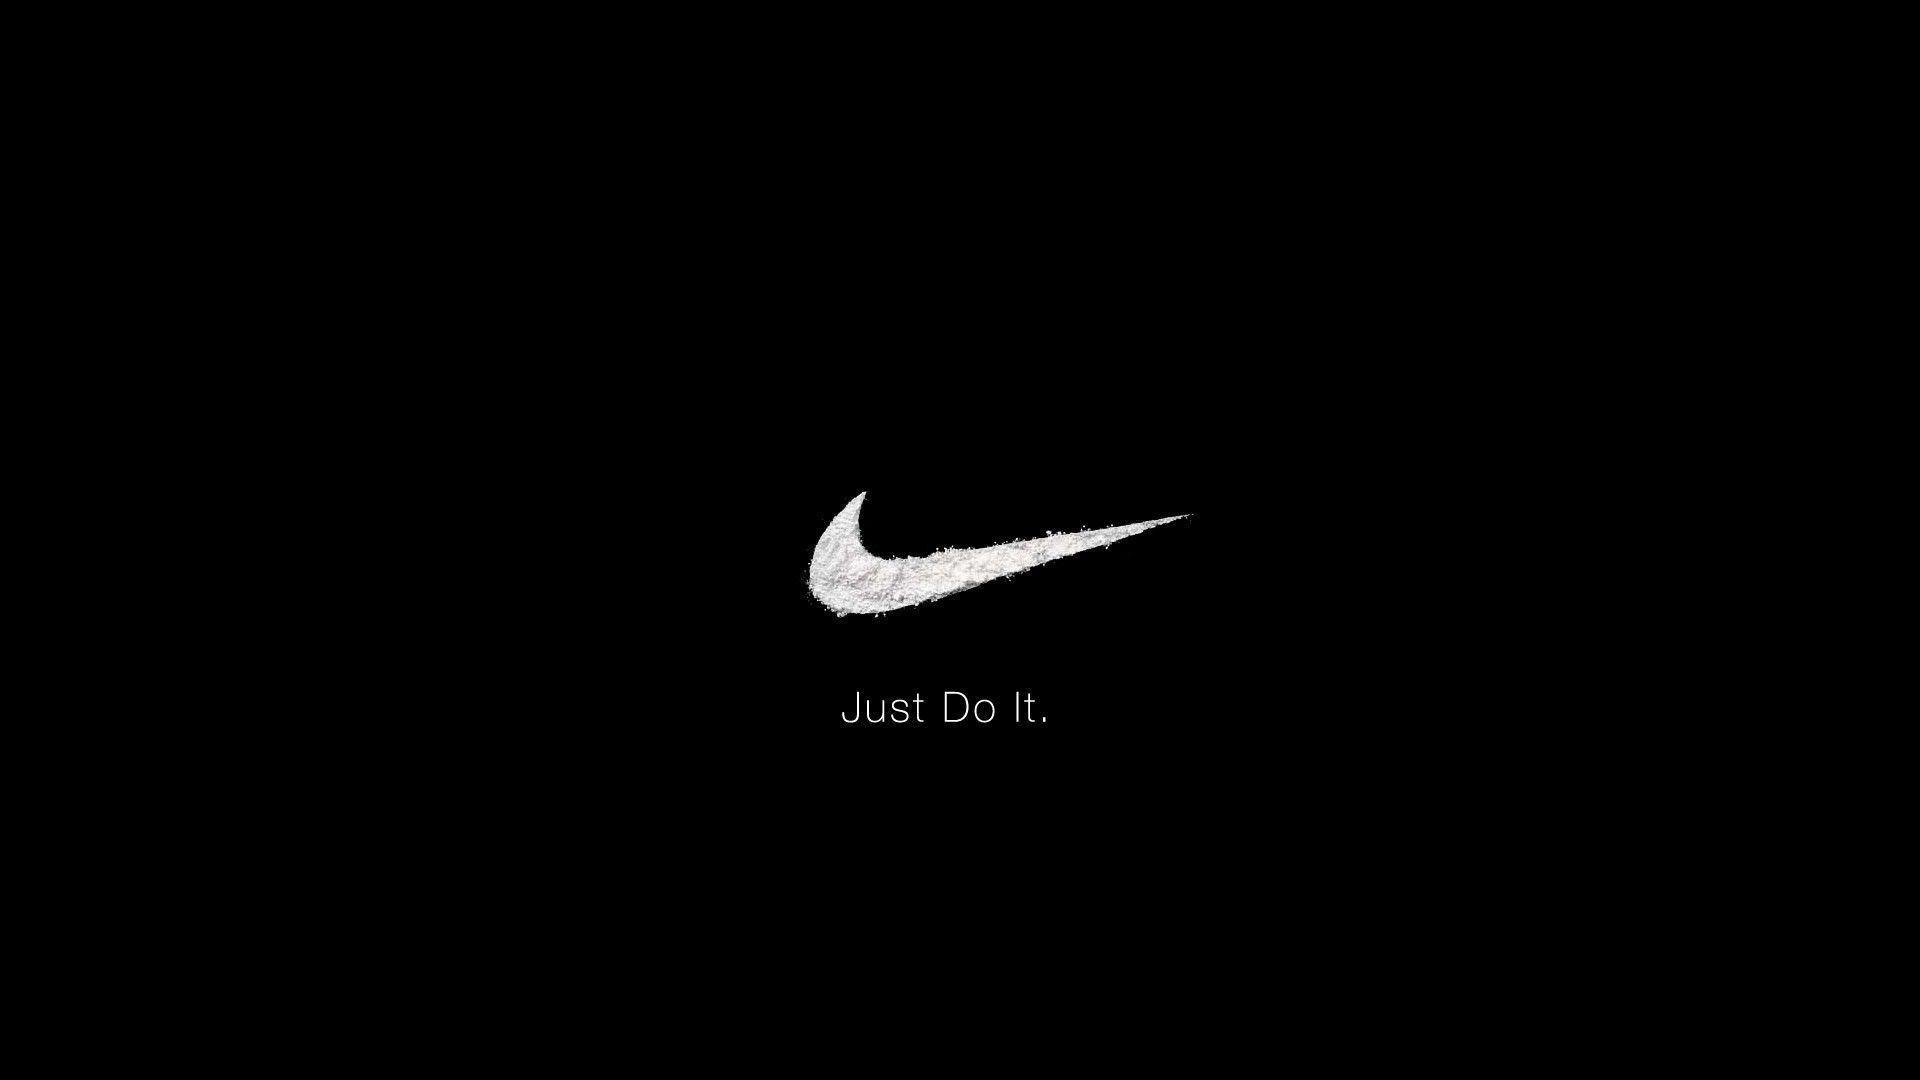 The Nike Logo: What Does The Swoosh Stand For?